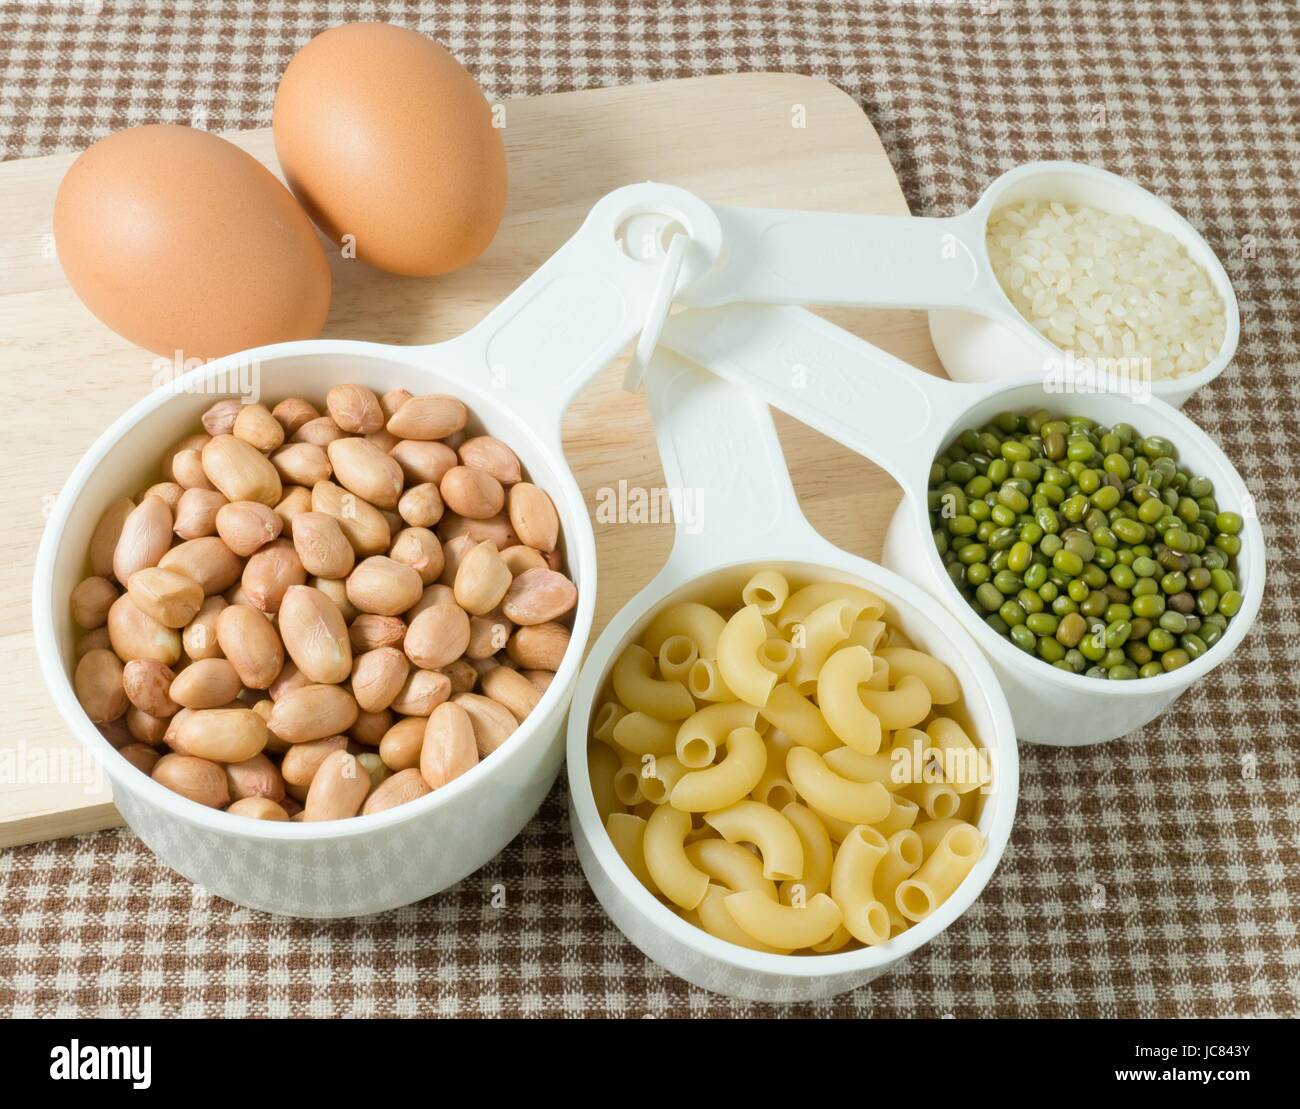 Food Ingredient, Raw Pasta, Rice, Peanuts, Mung Beans and Egg High in Carbohydrate and Protein. Stock Photo